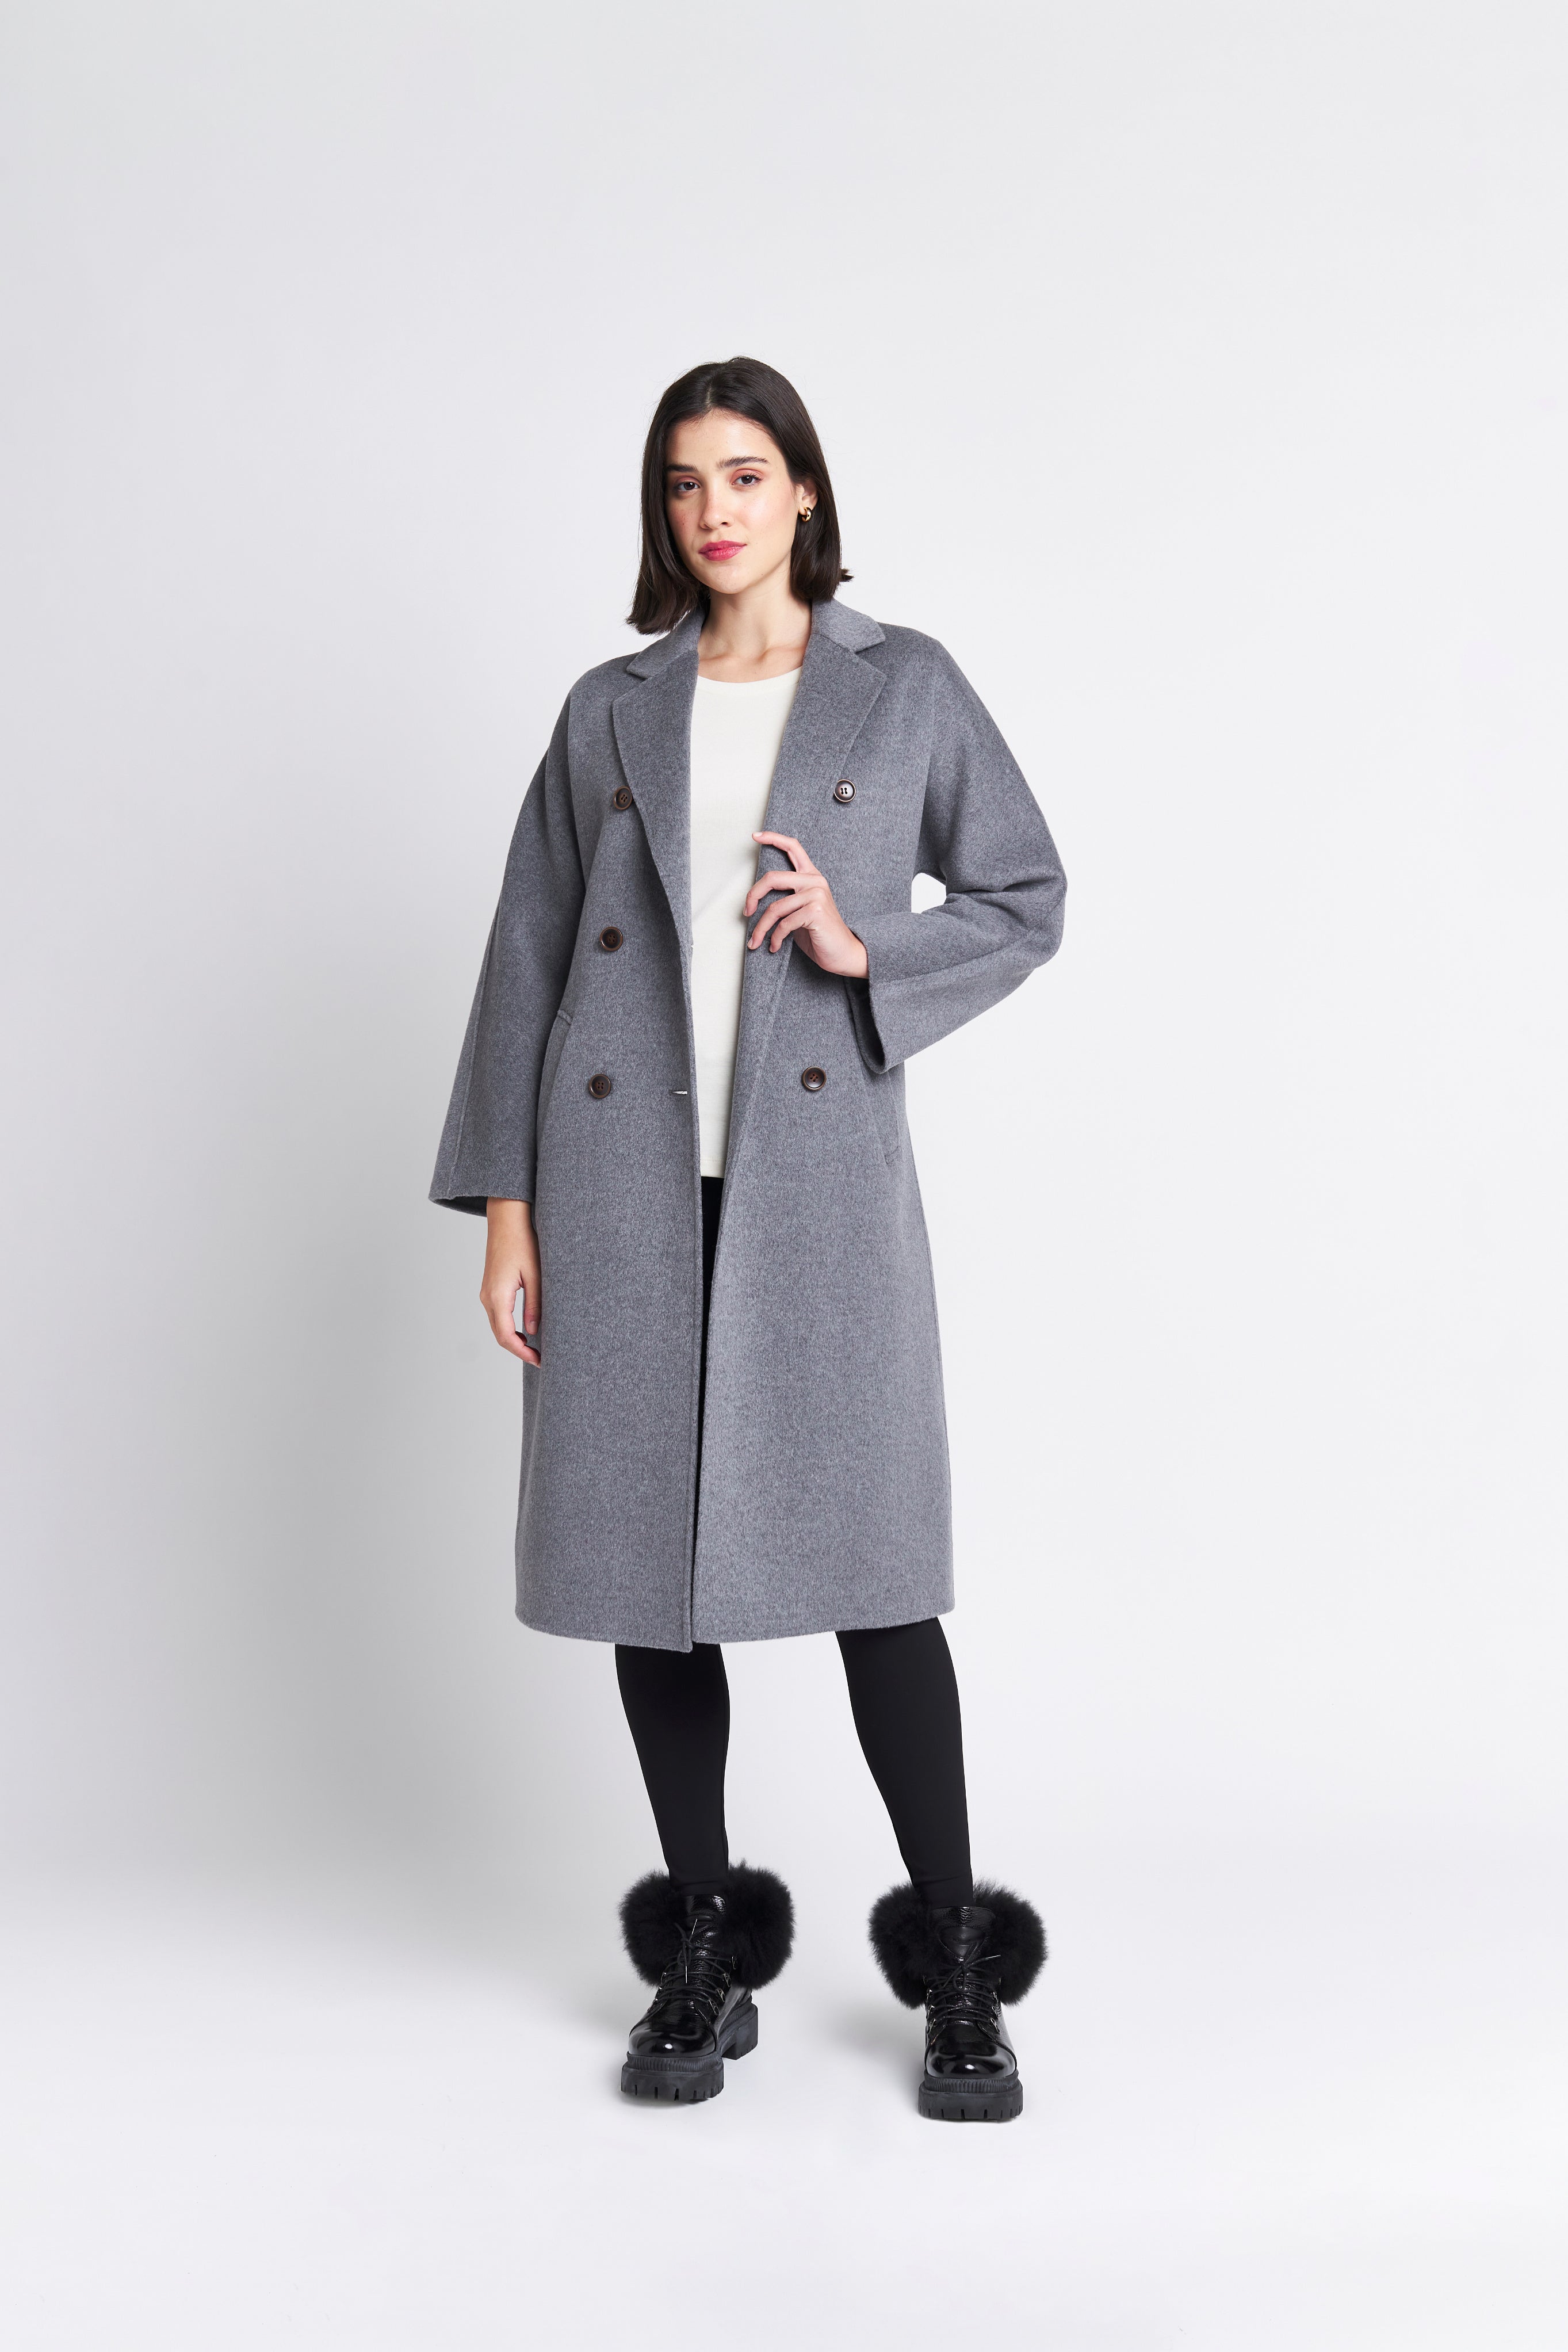 UNUSUAL DOUBLE BREASTED WOOL & CASHMERE  BELTED COAT